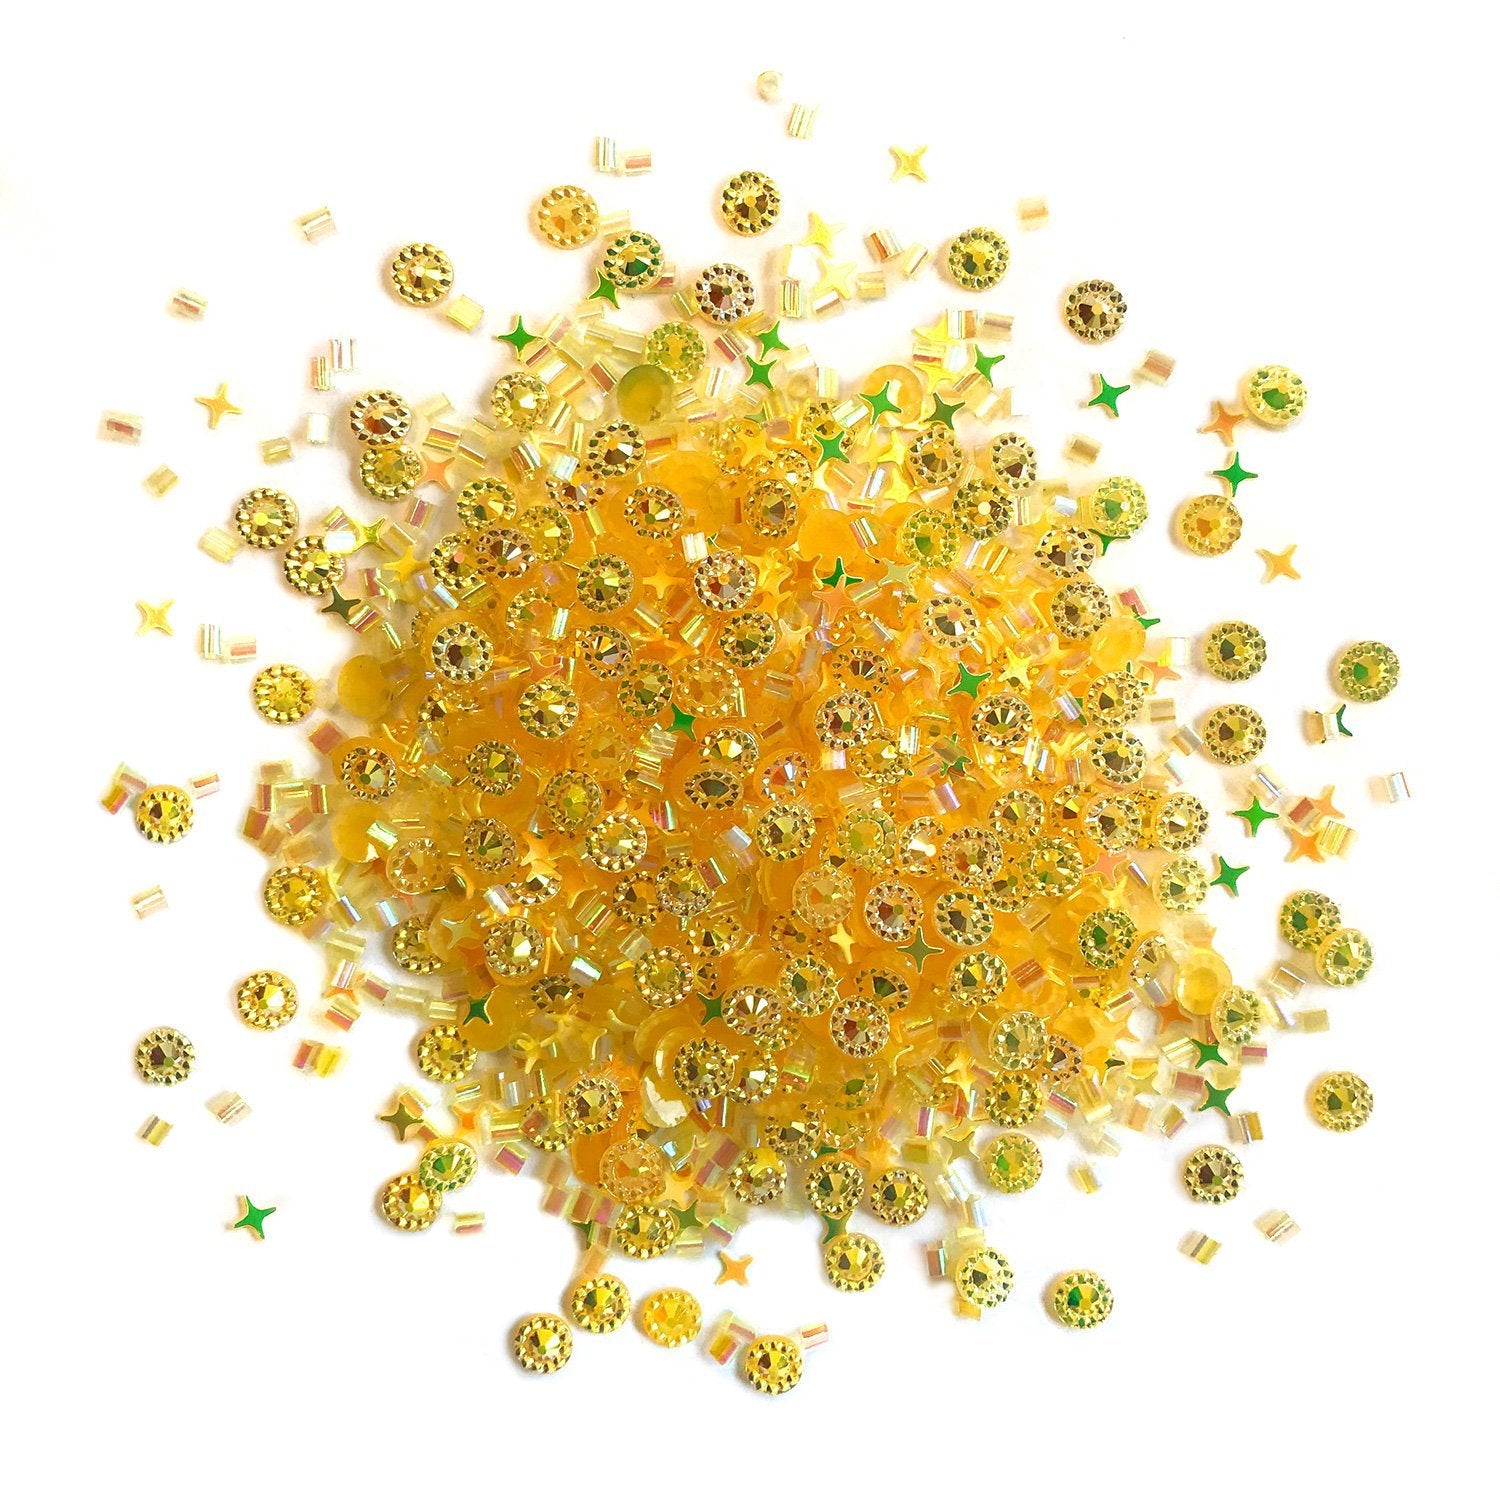 Golden Yellow Gems & Jewels for Crafts & Jewelry Making, Buttons Galore